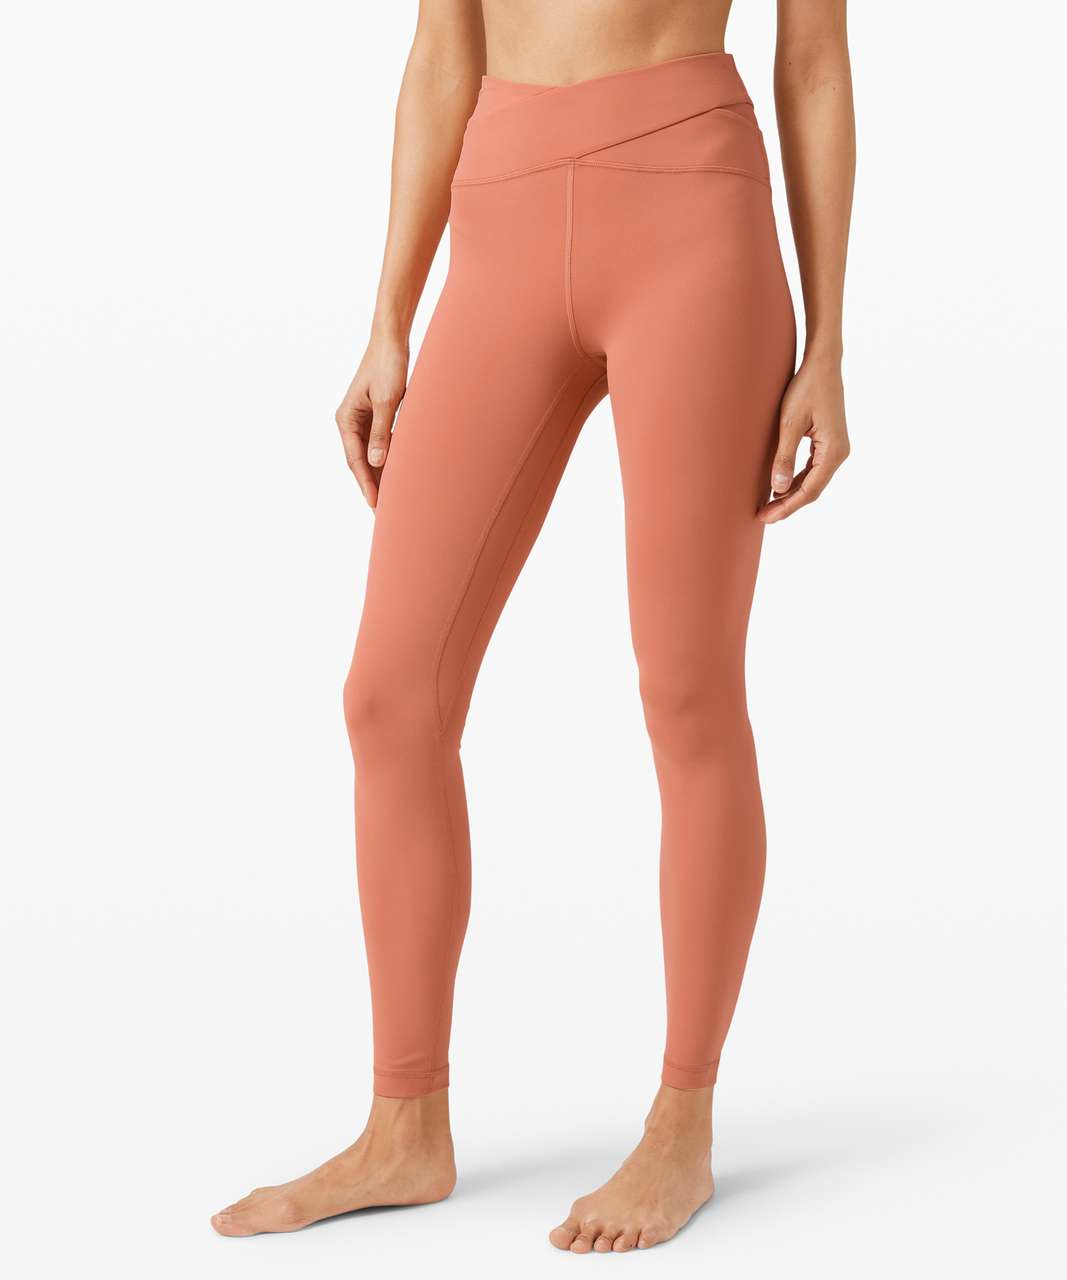 Lululemon Aligned Angles Super High Rise Tight 28" - Rustic Coral